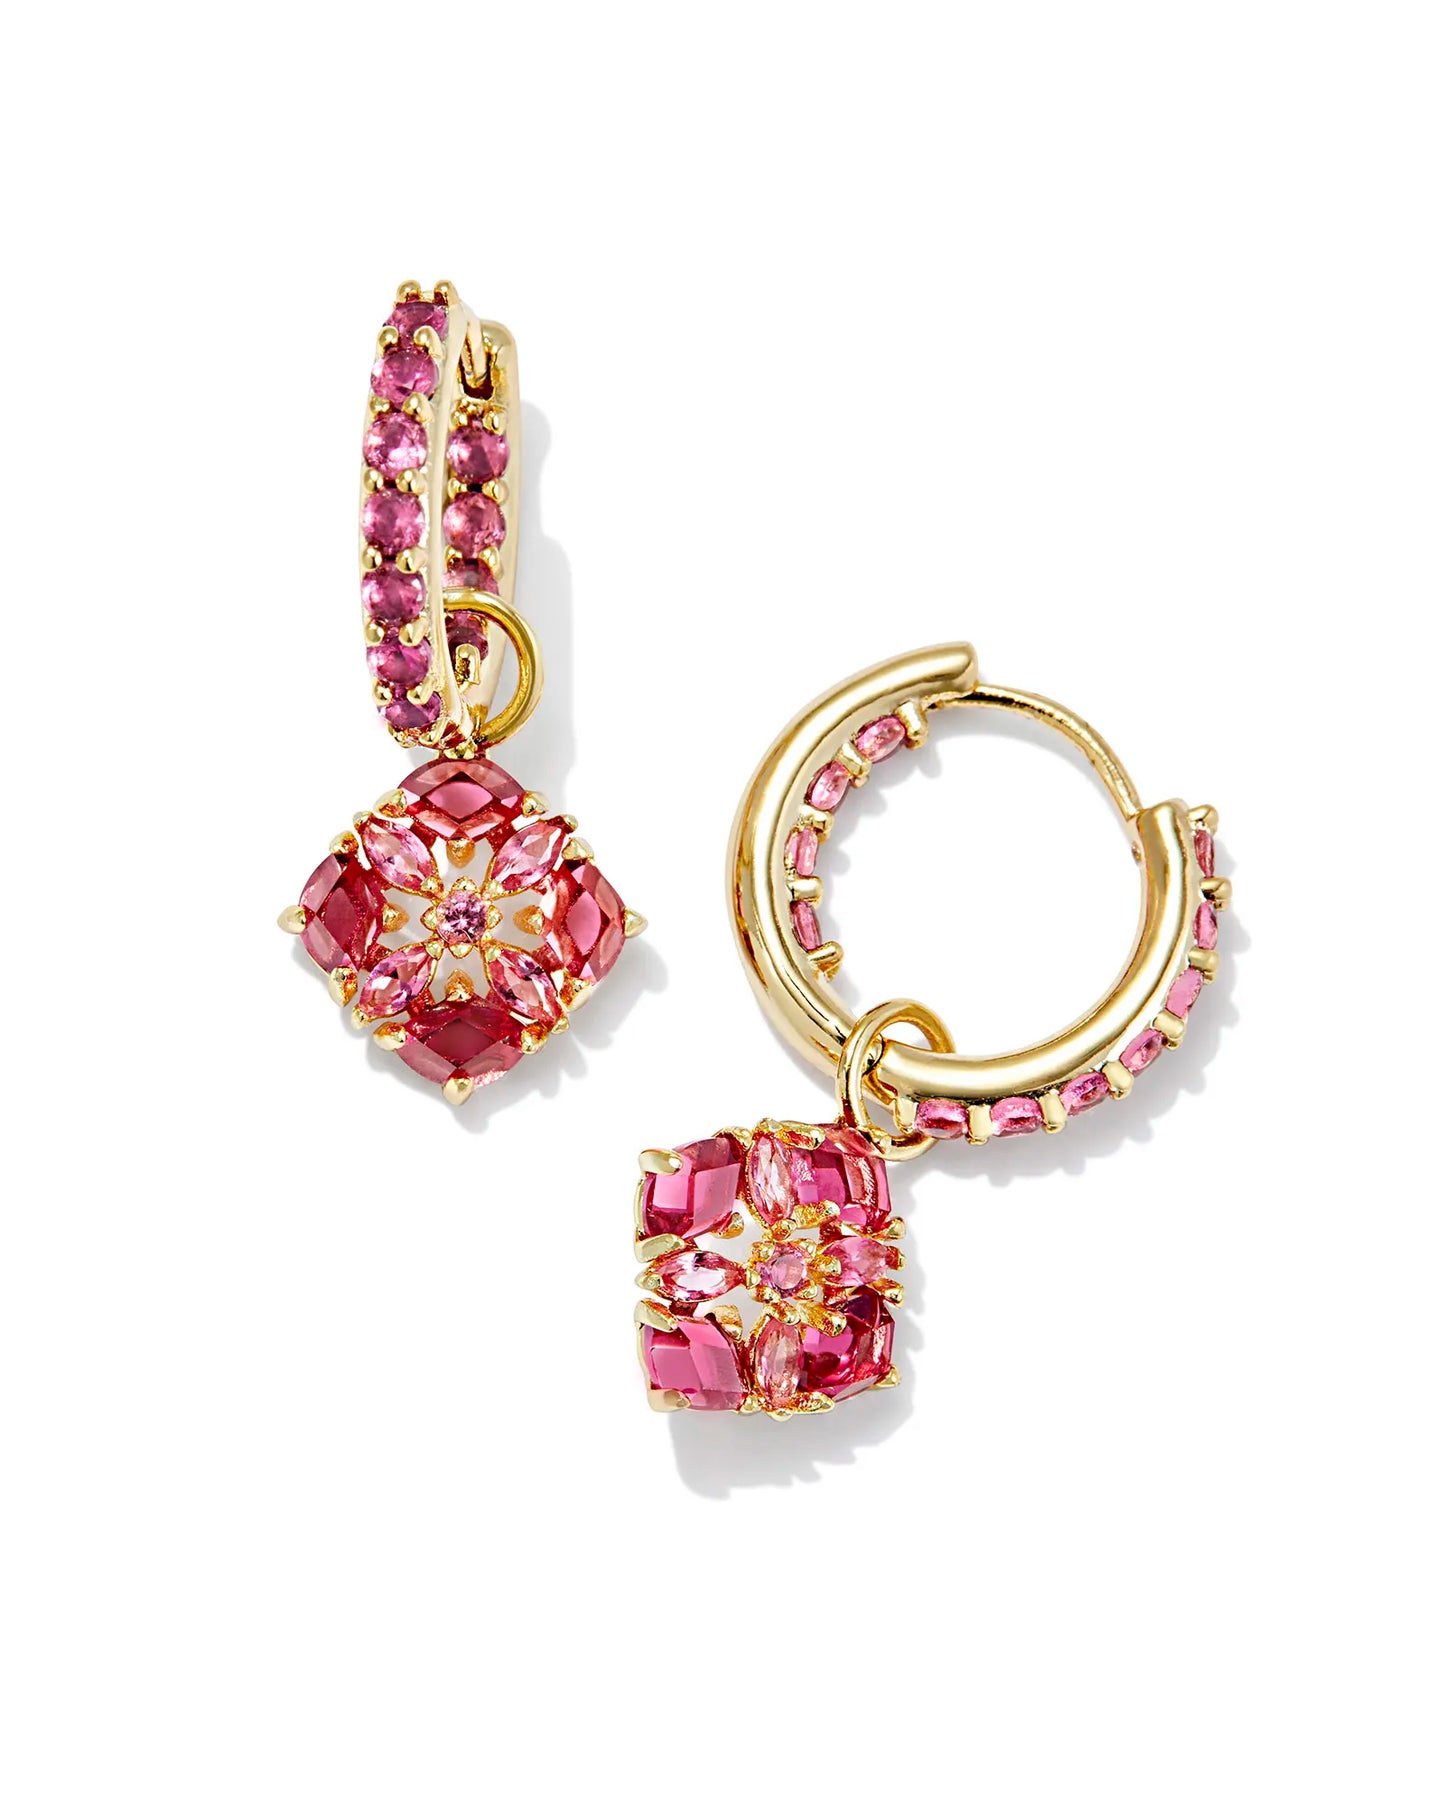 gold huggie earrings with pink crystal detailing and a flower charm that is pink crystal studded